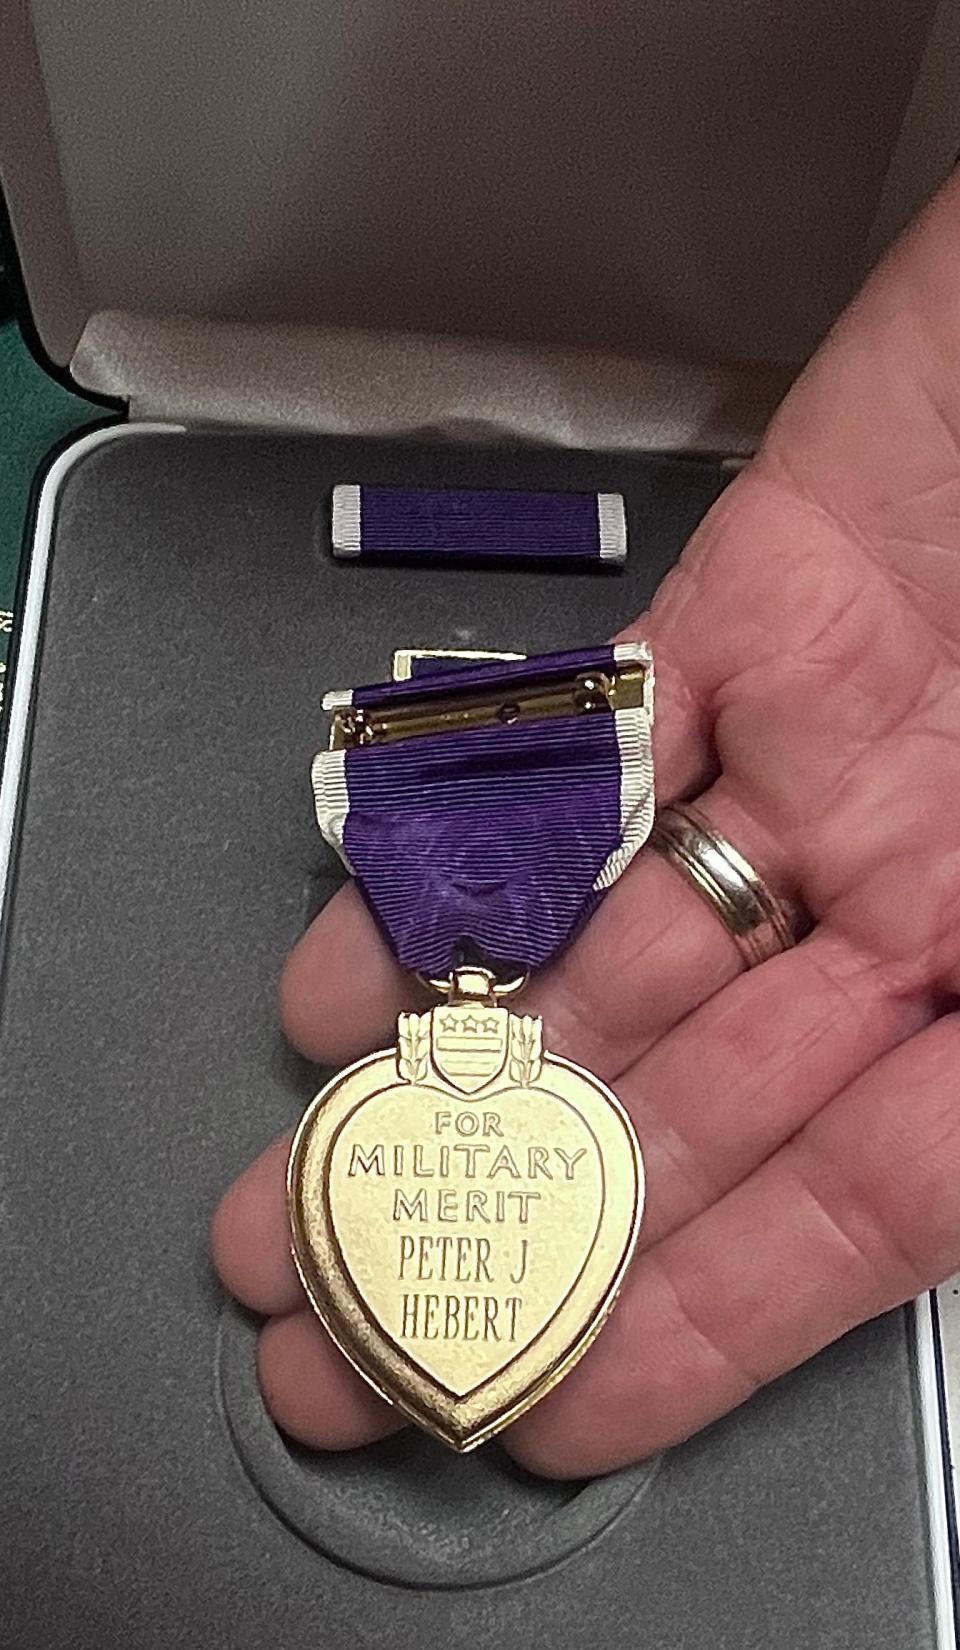 Vinnie Hebert of Dighton holds the Purple Heart that was recently awarded to his grandfather Peter J. Hebert of Taunton, who was wounded in France in 1918 during World War I.